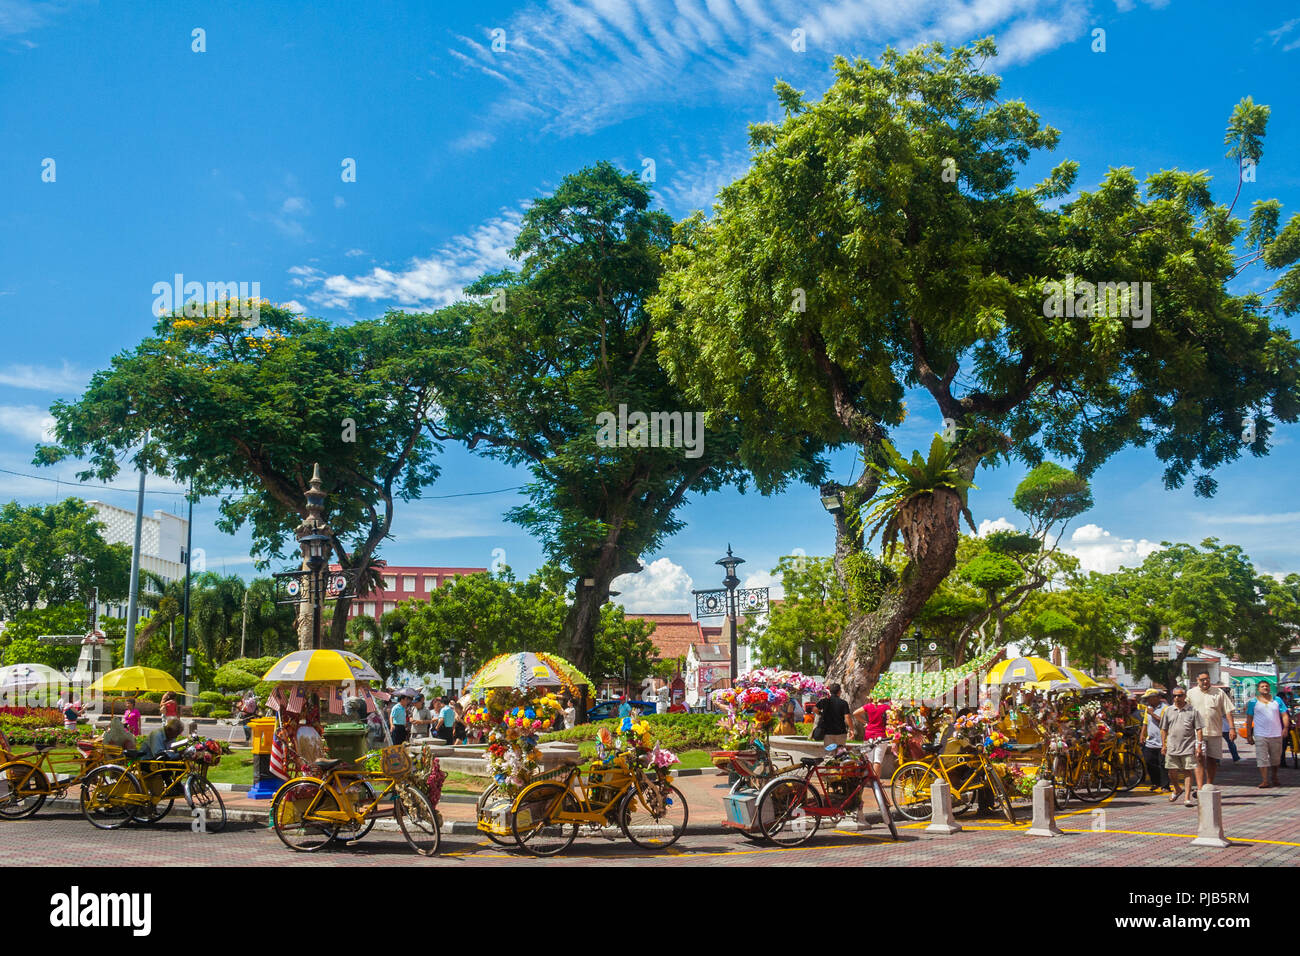 Tourists strolling along nicely decorated yellow trishaws near the fountain at the Dutch Square (Stadthuys area) under trees shade on a beautiful... Stock Photo